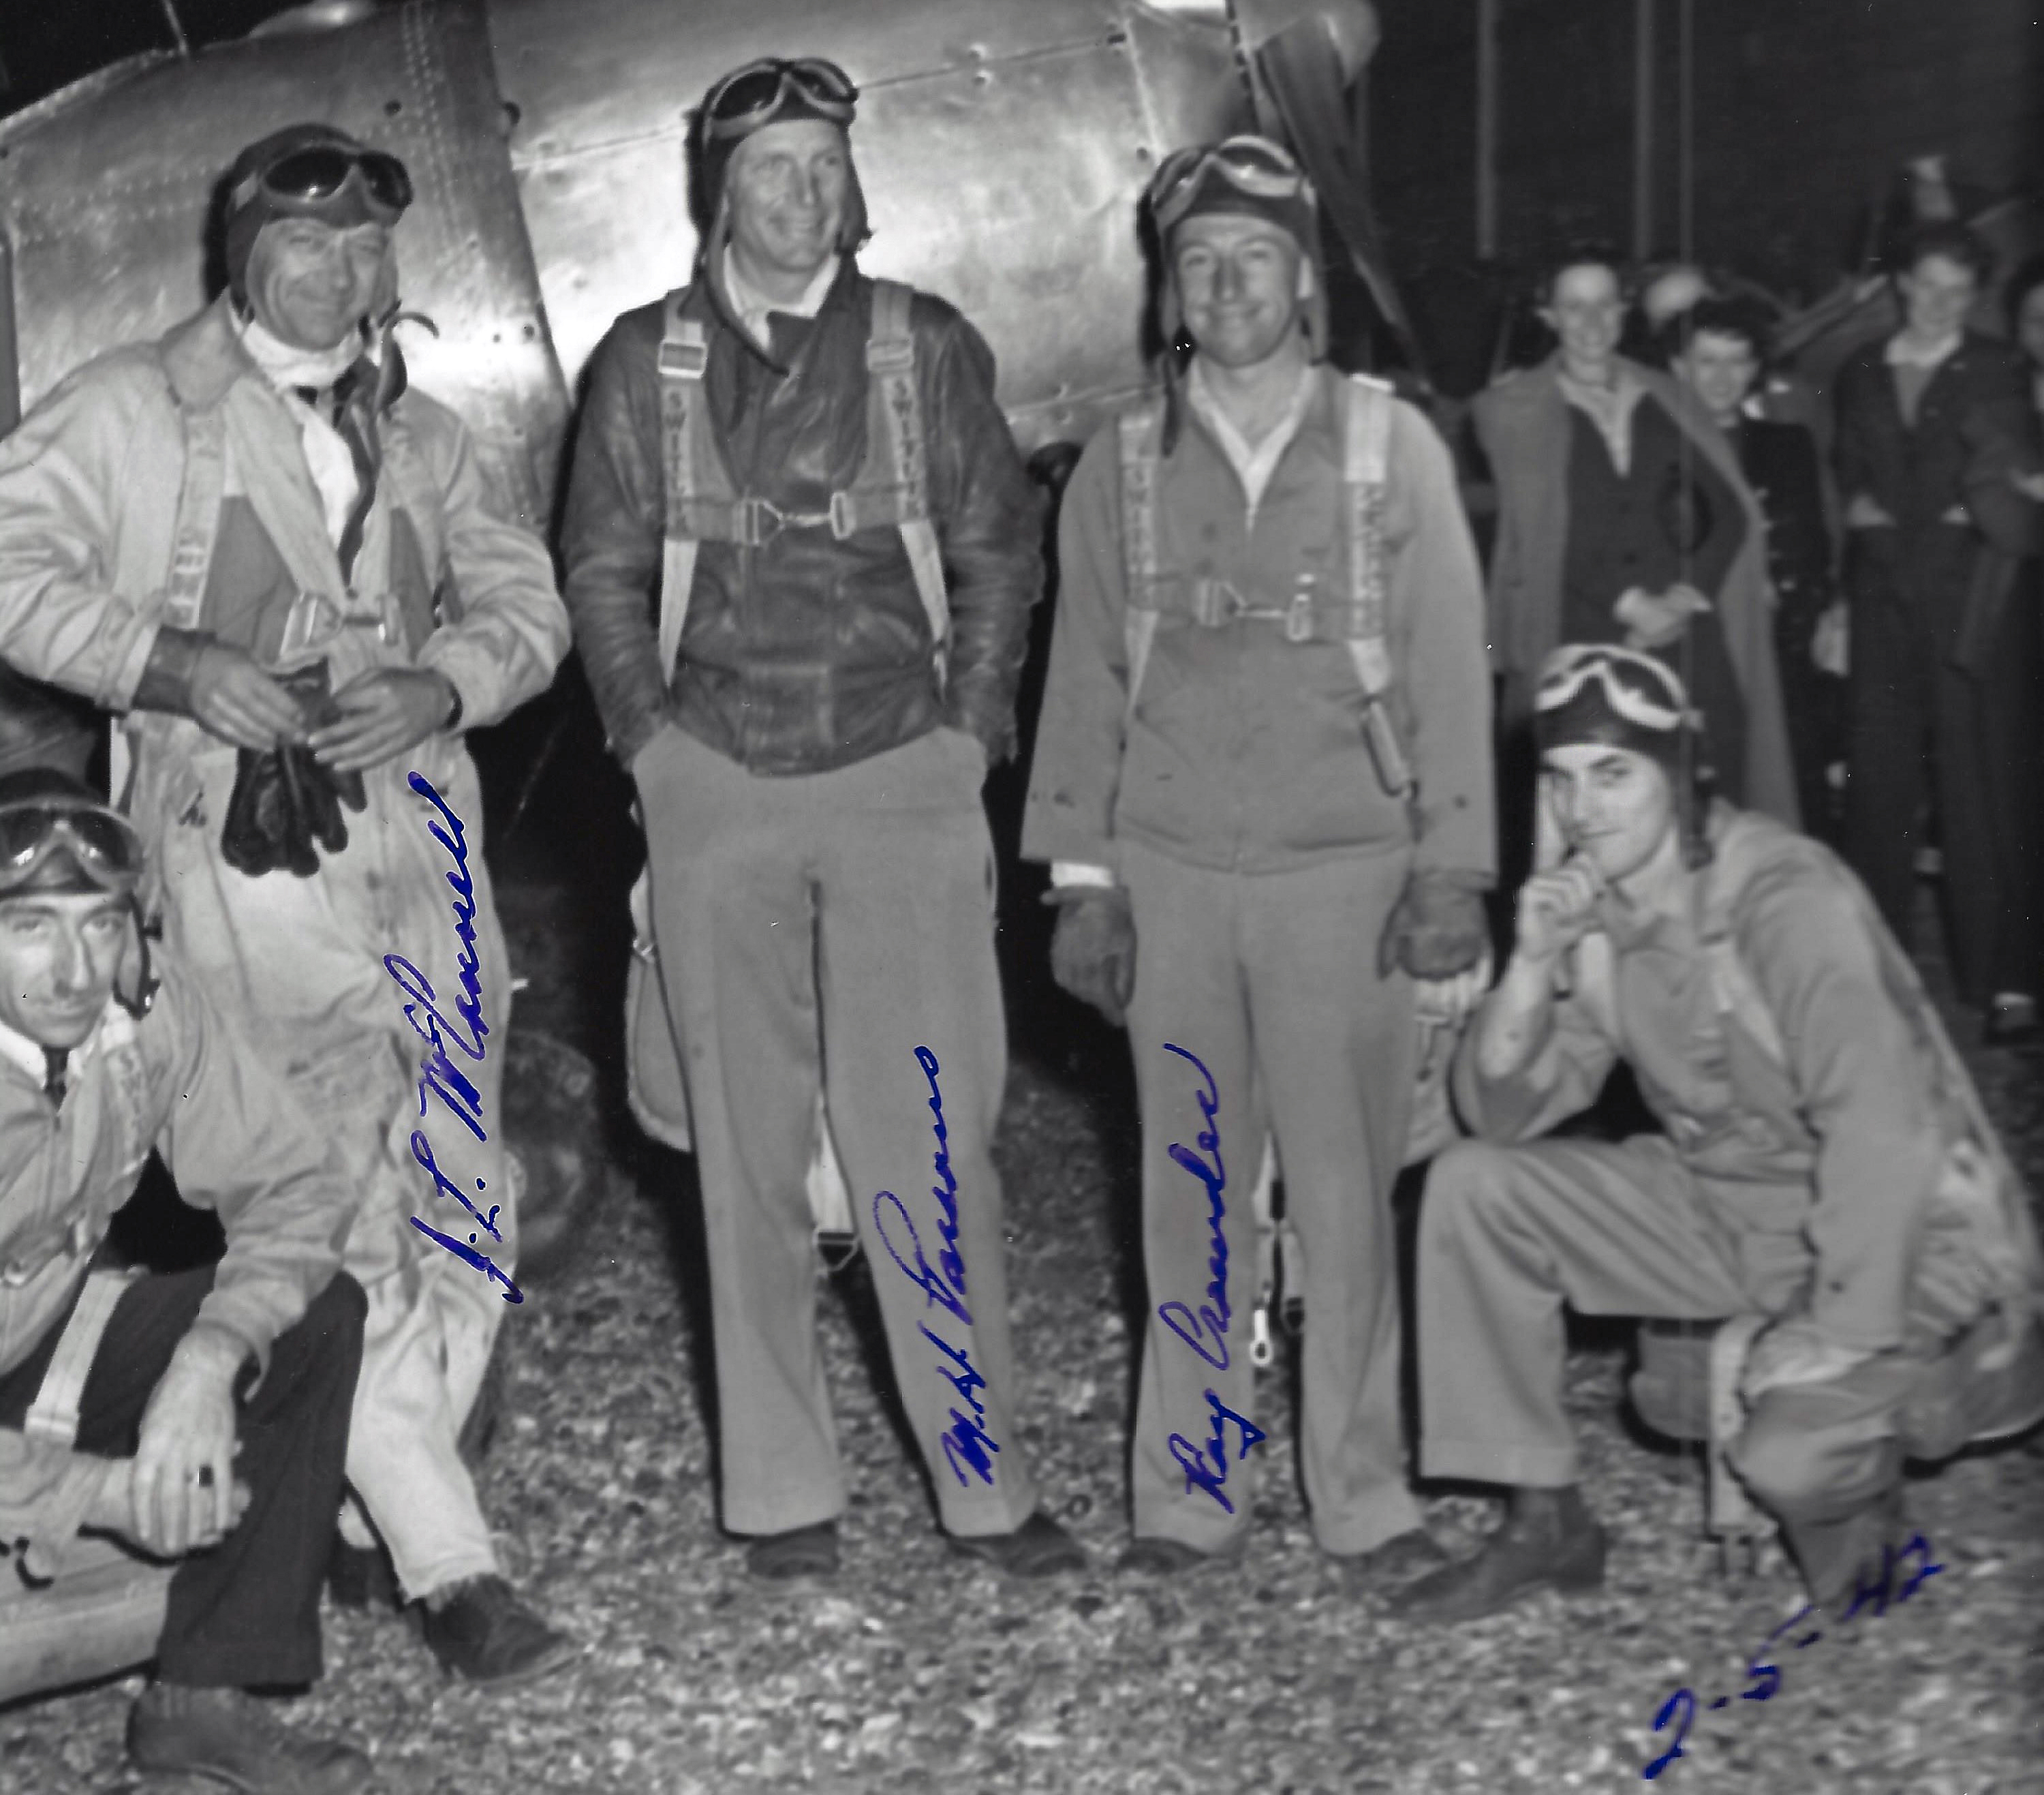 Val on the right, squatting down with a group of pilots Webb's Flying Service 1942_Elaine standing behind him (1)